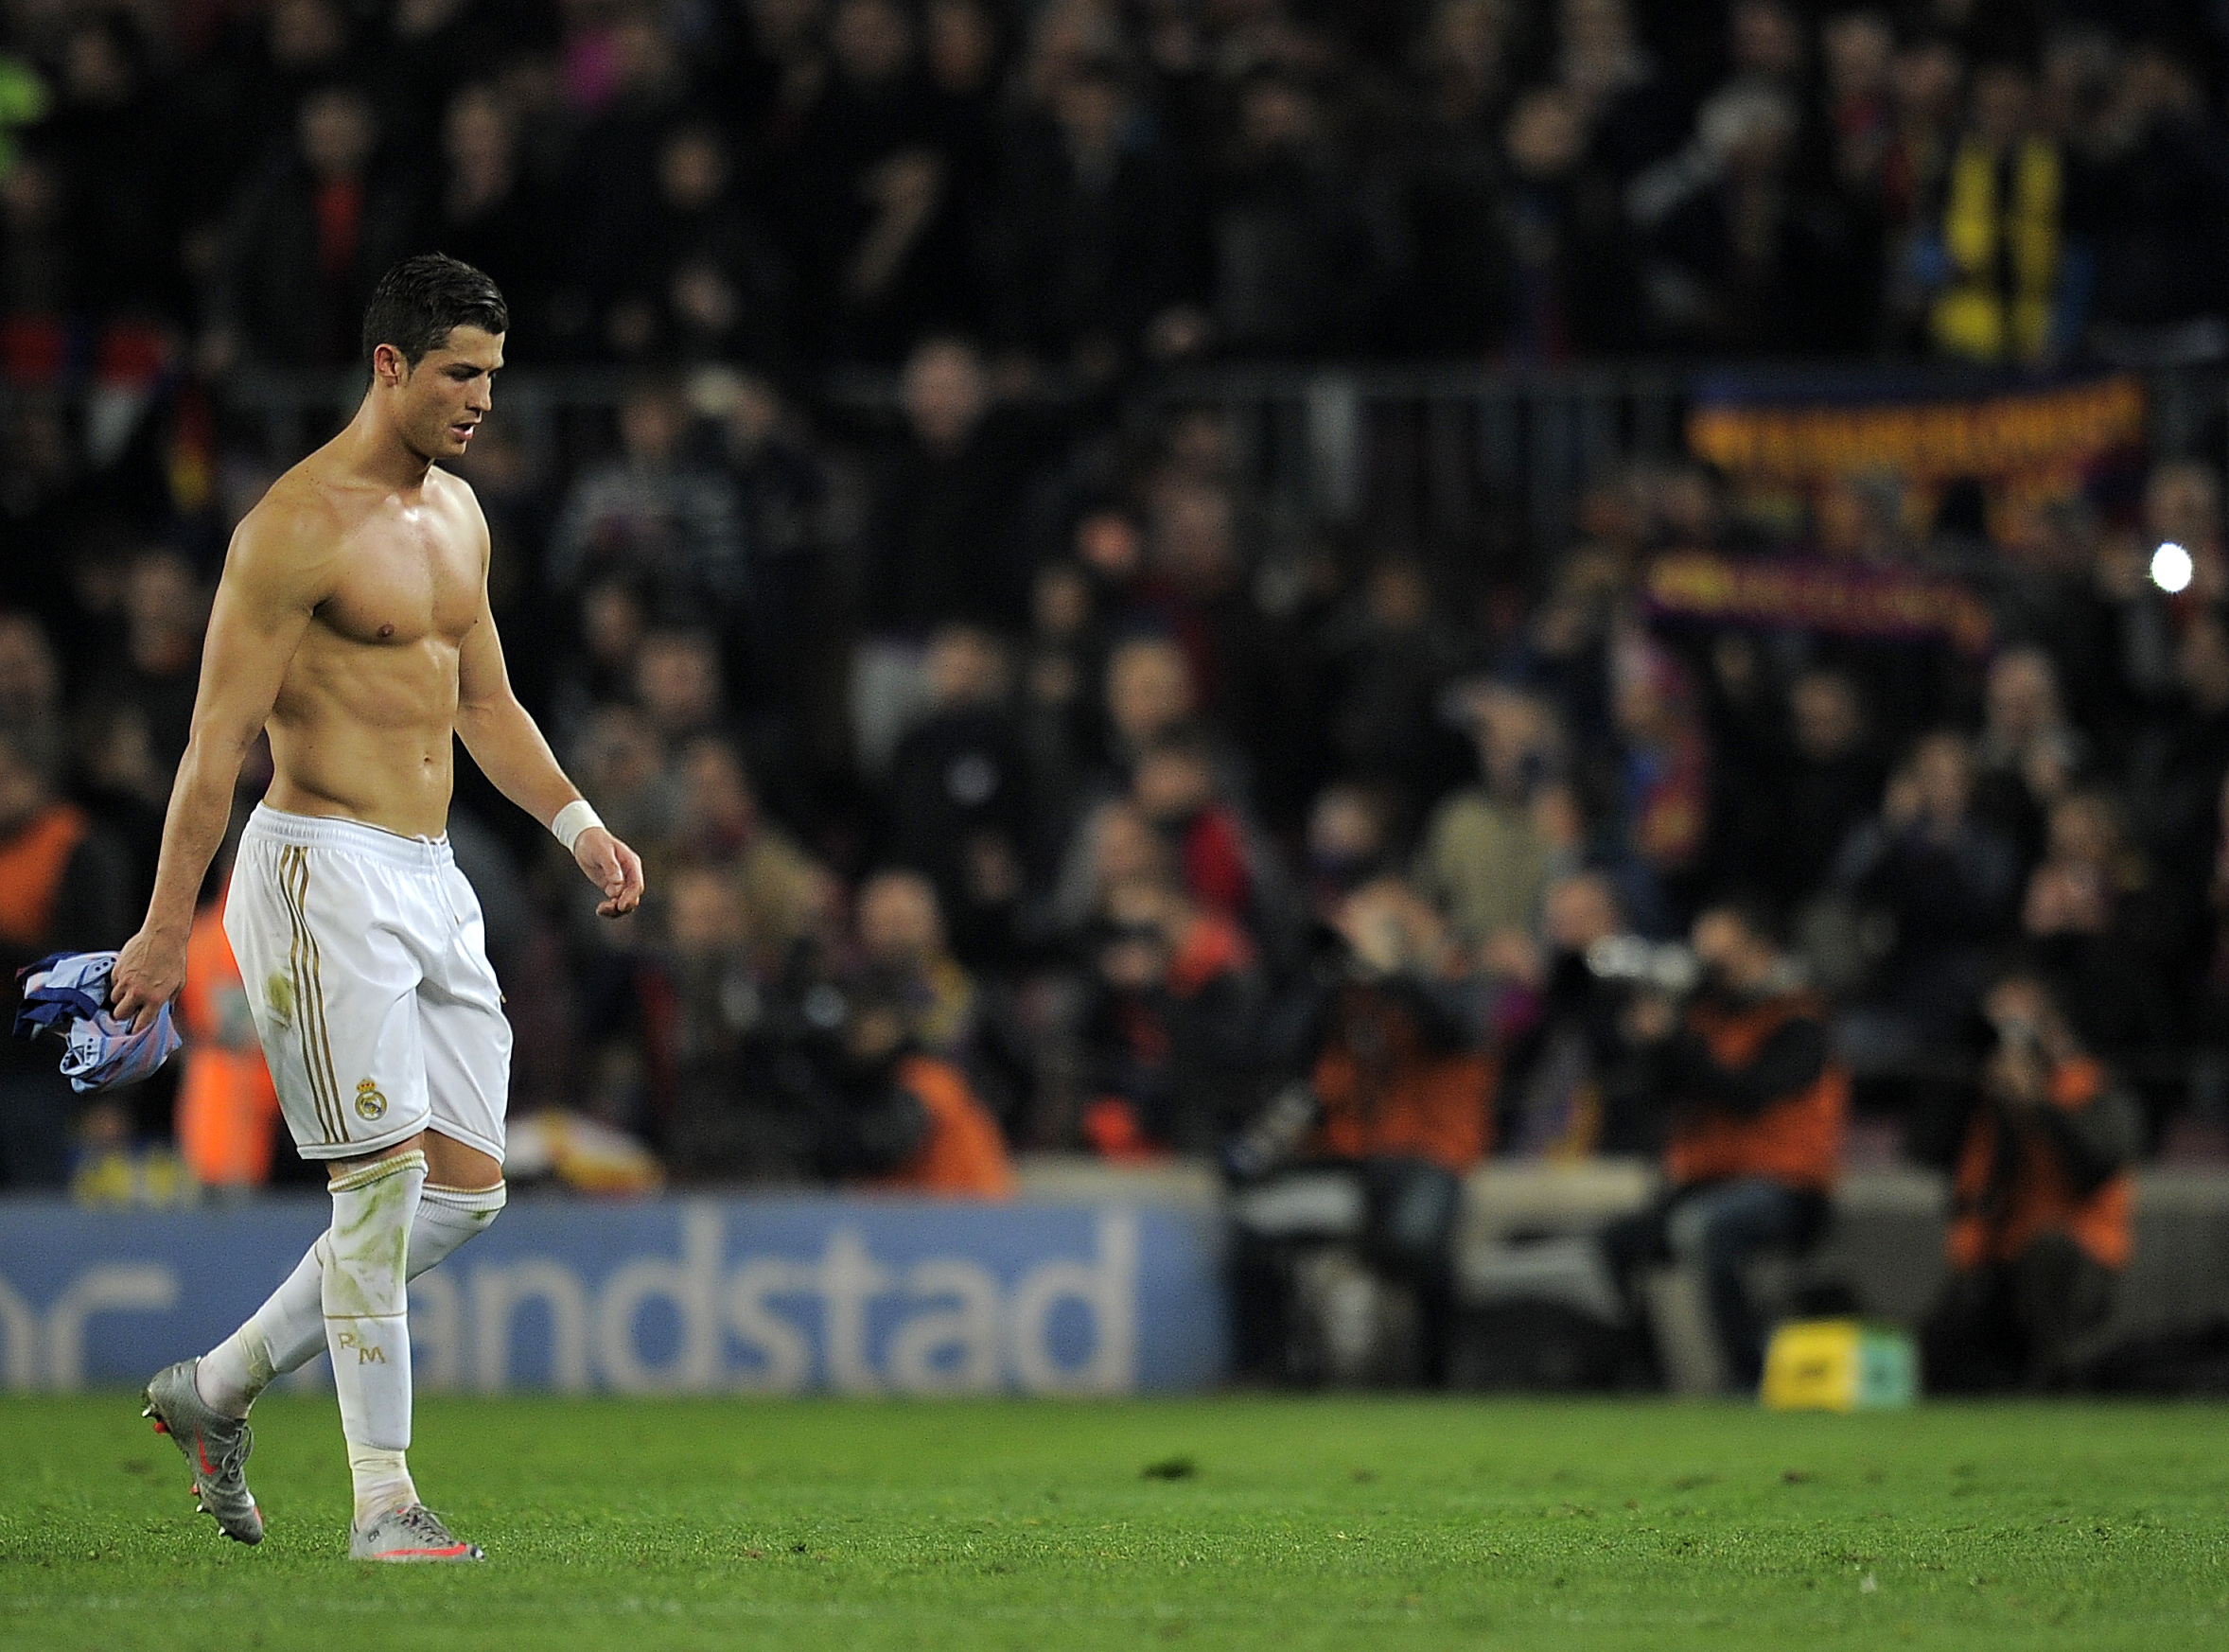 Real Madrid's Portuguese forward Cristiano Ronaldo leaves the field after the second leg of the Spanish Cup quarter-final "El clasico" football match Barcelona vs Real Madrid at the Camp Nou stadium in Barcelona on January 25, 2012. (Luis Gene—AFP/Getty Images)